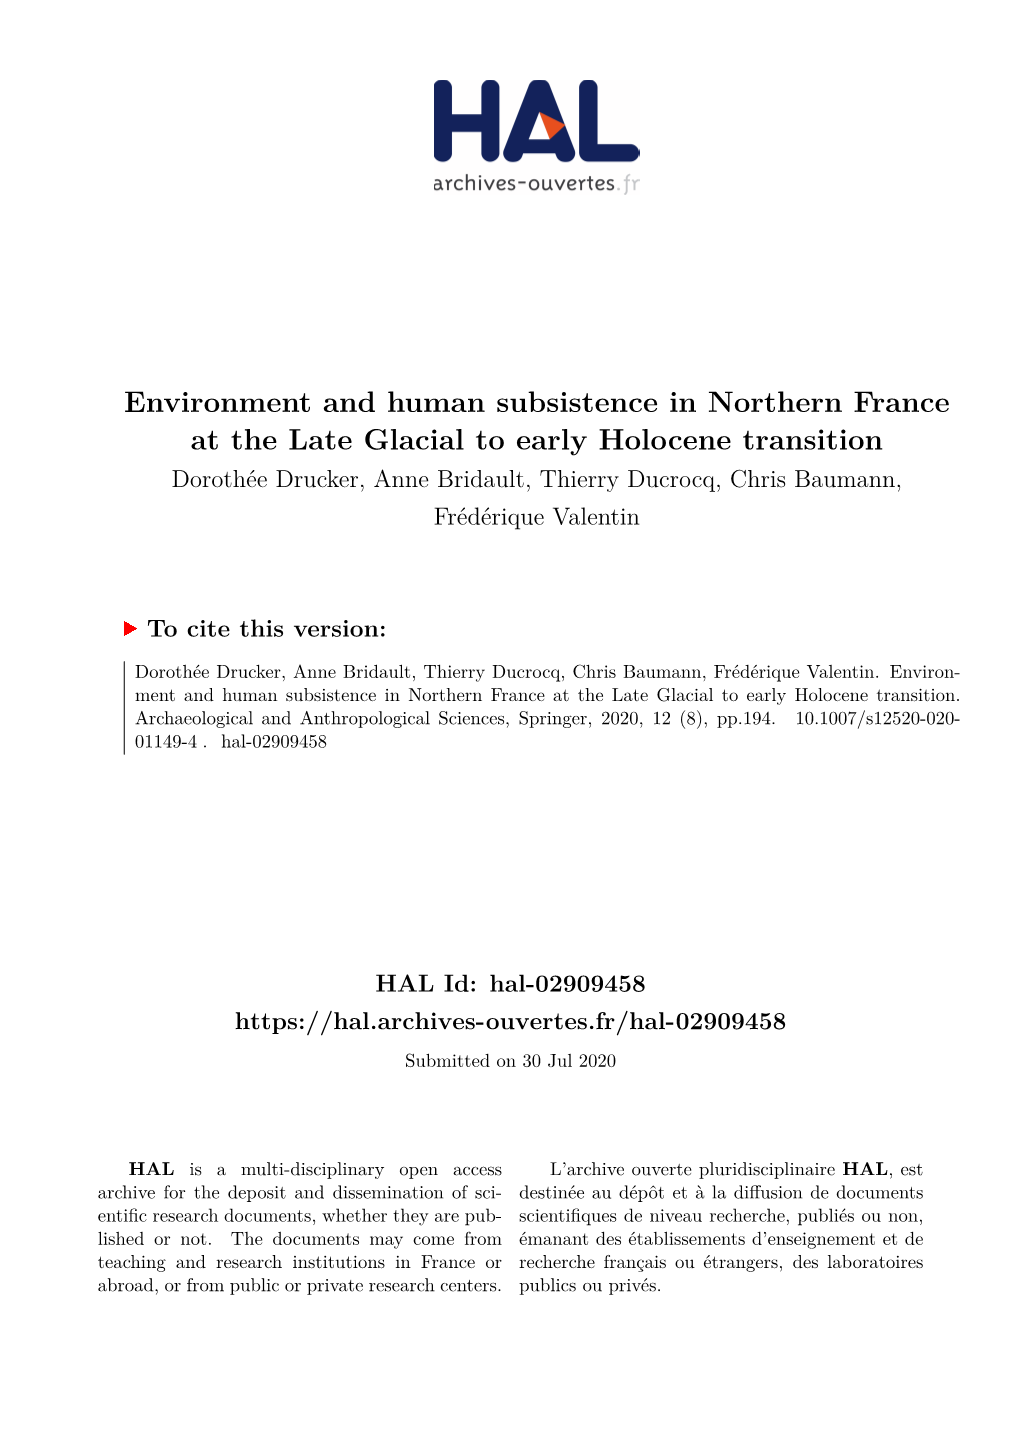 Environment and Human Subsistence in Northern France at the Late Glacial to Early Holocene Transition